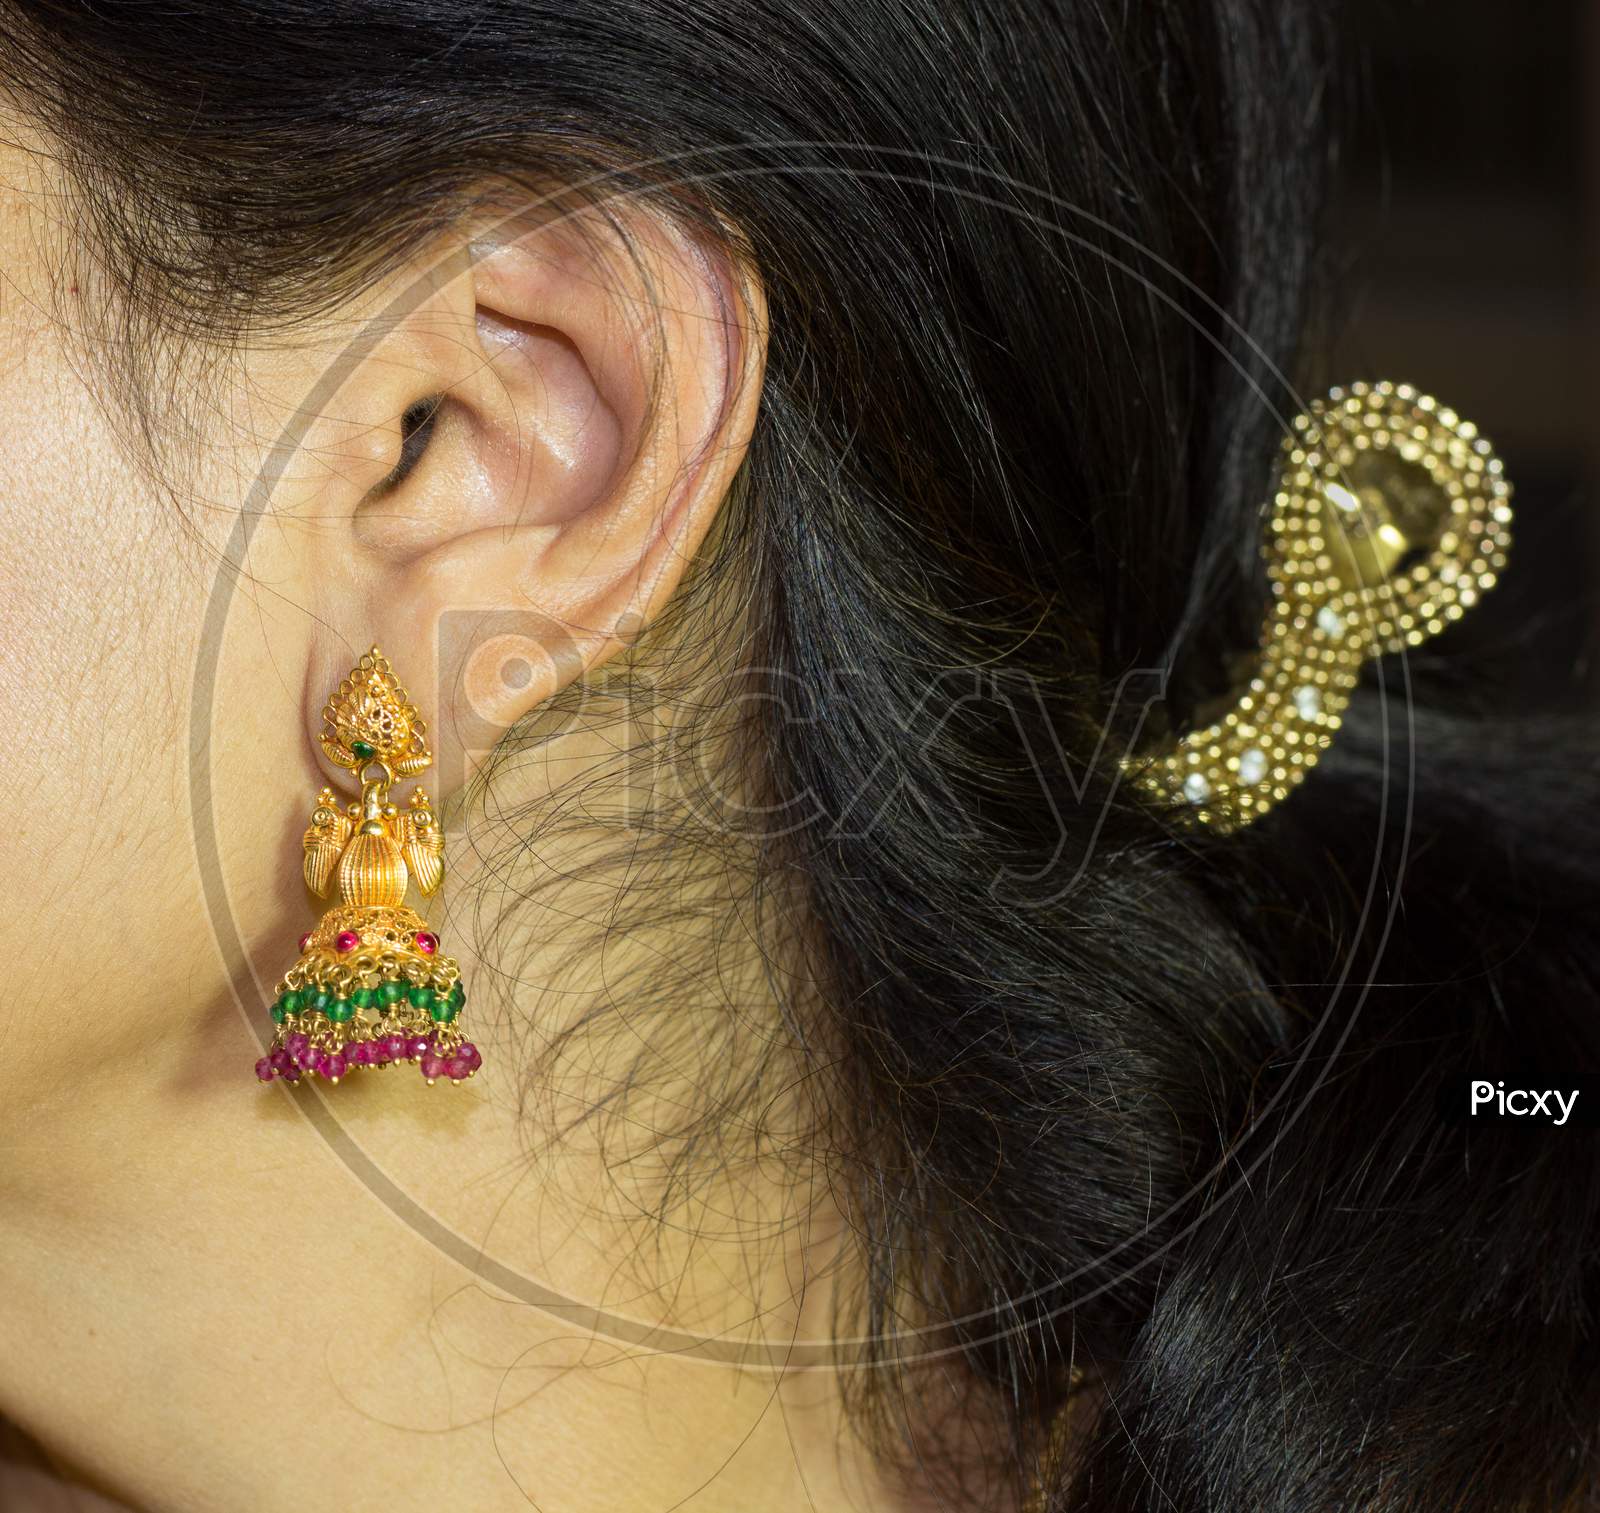 A close up view of a Indian Lady wearing Traditional Earrings for the Diwali festival of Lights.